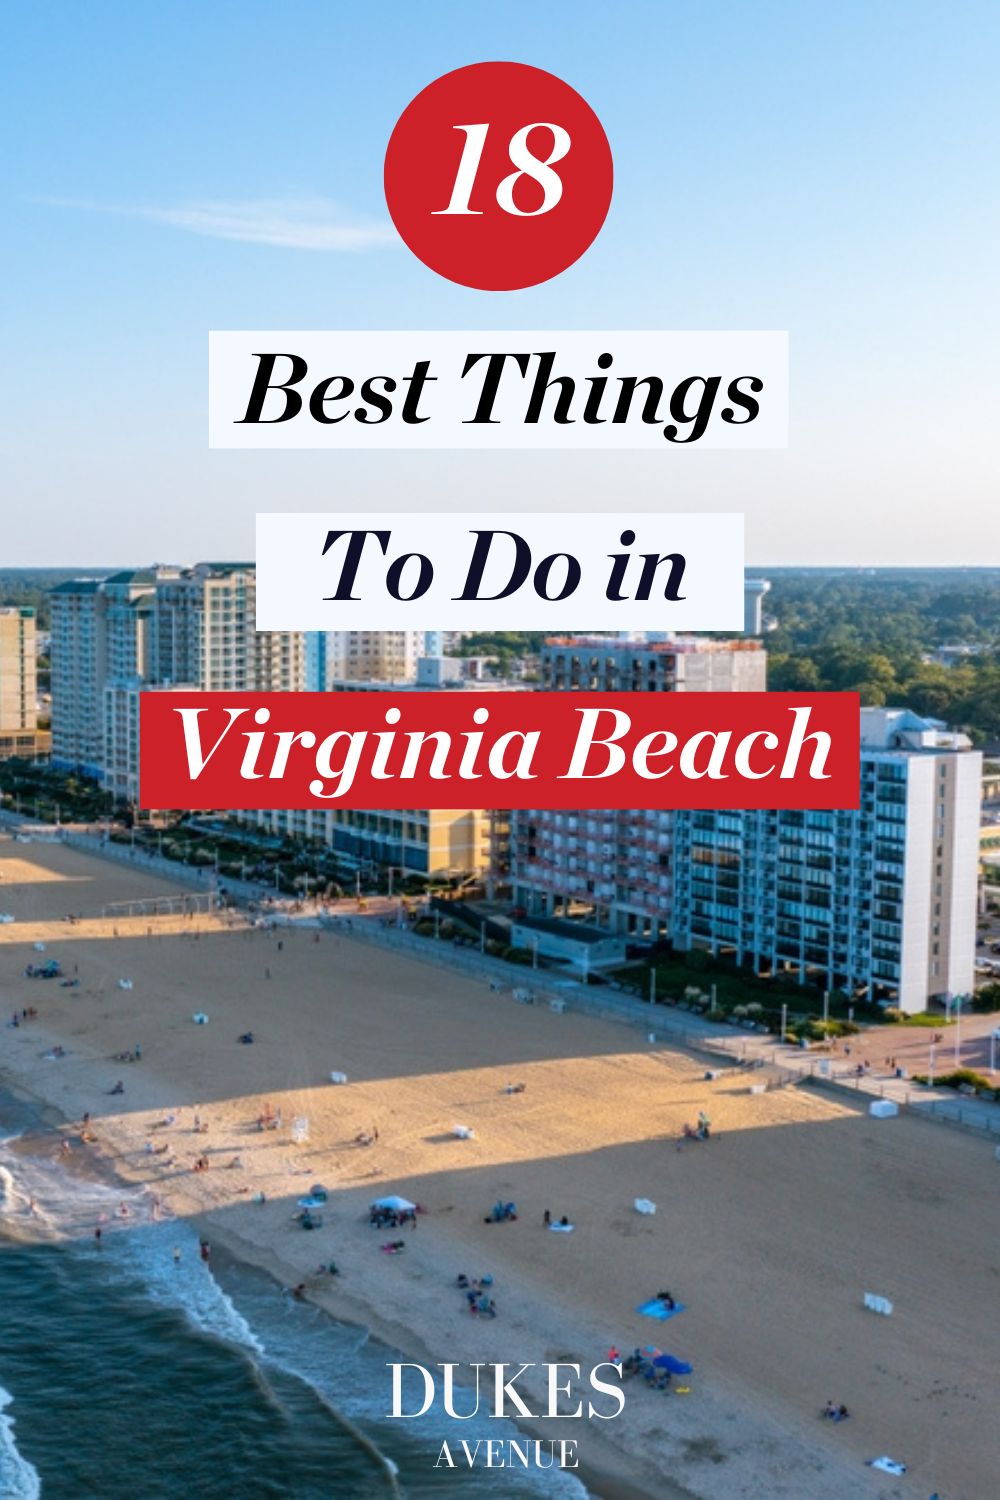 Aerial shot of Virginia Beach with text overlay '18 Best Things to Do in Virginia Beach'